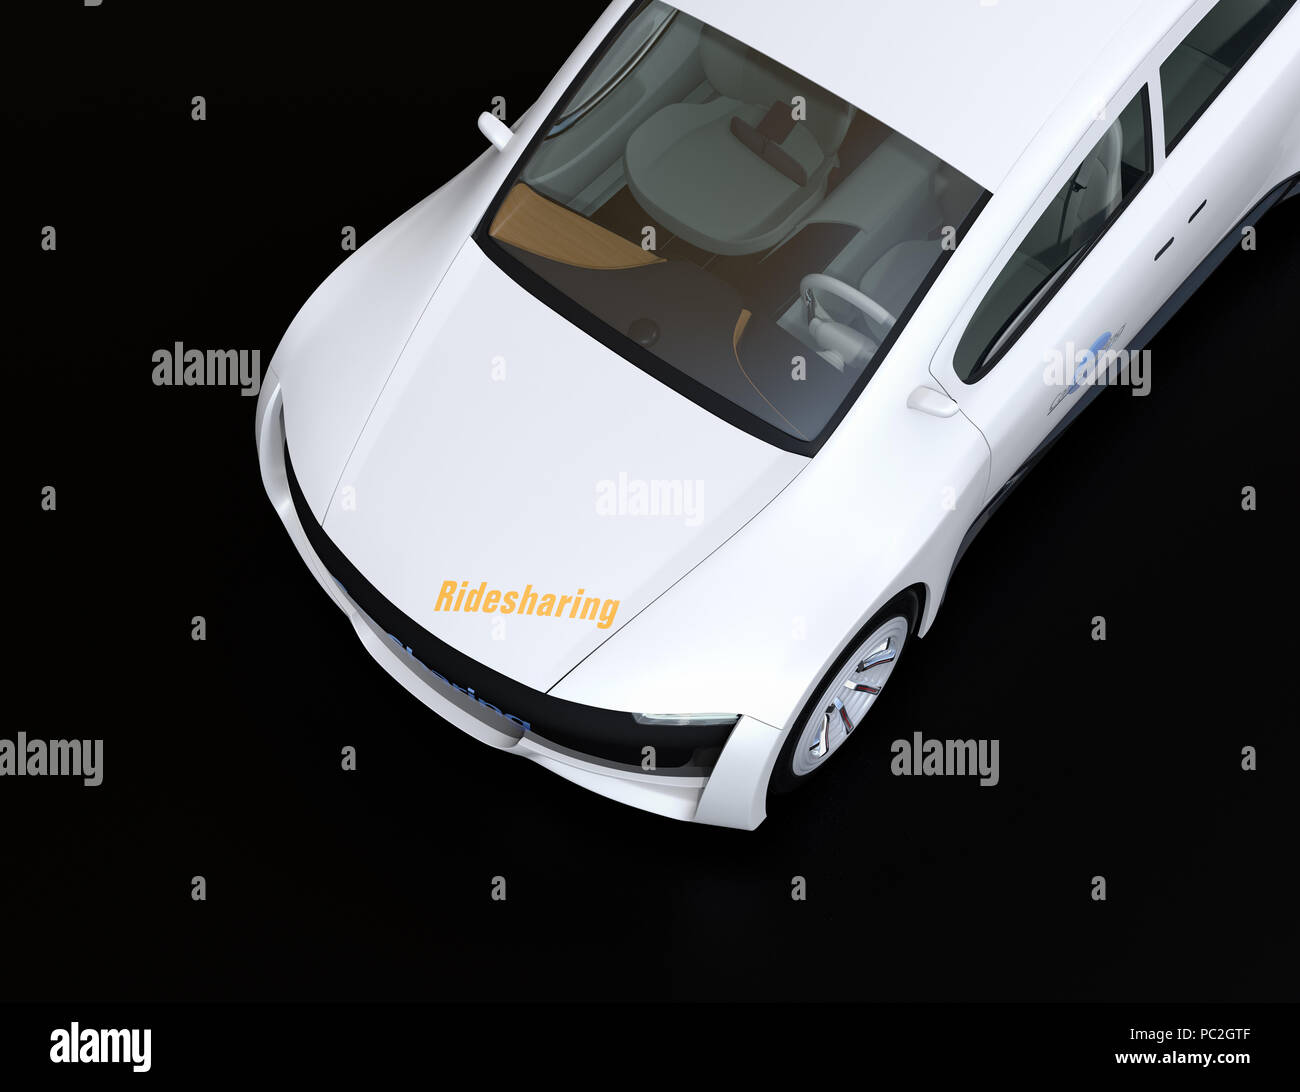 Close-up view of white electric car on black background. 3D rendering image. Stock Photo